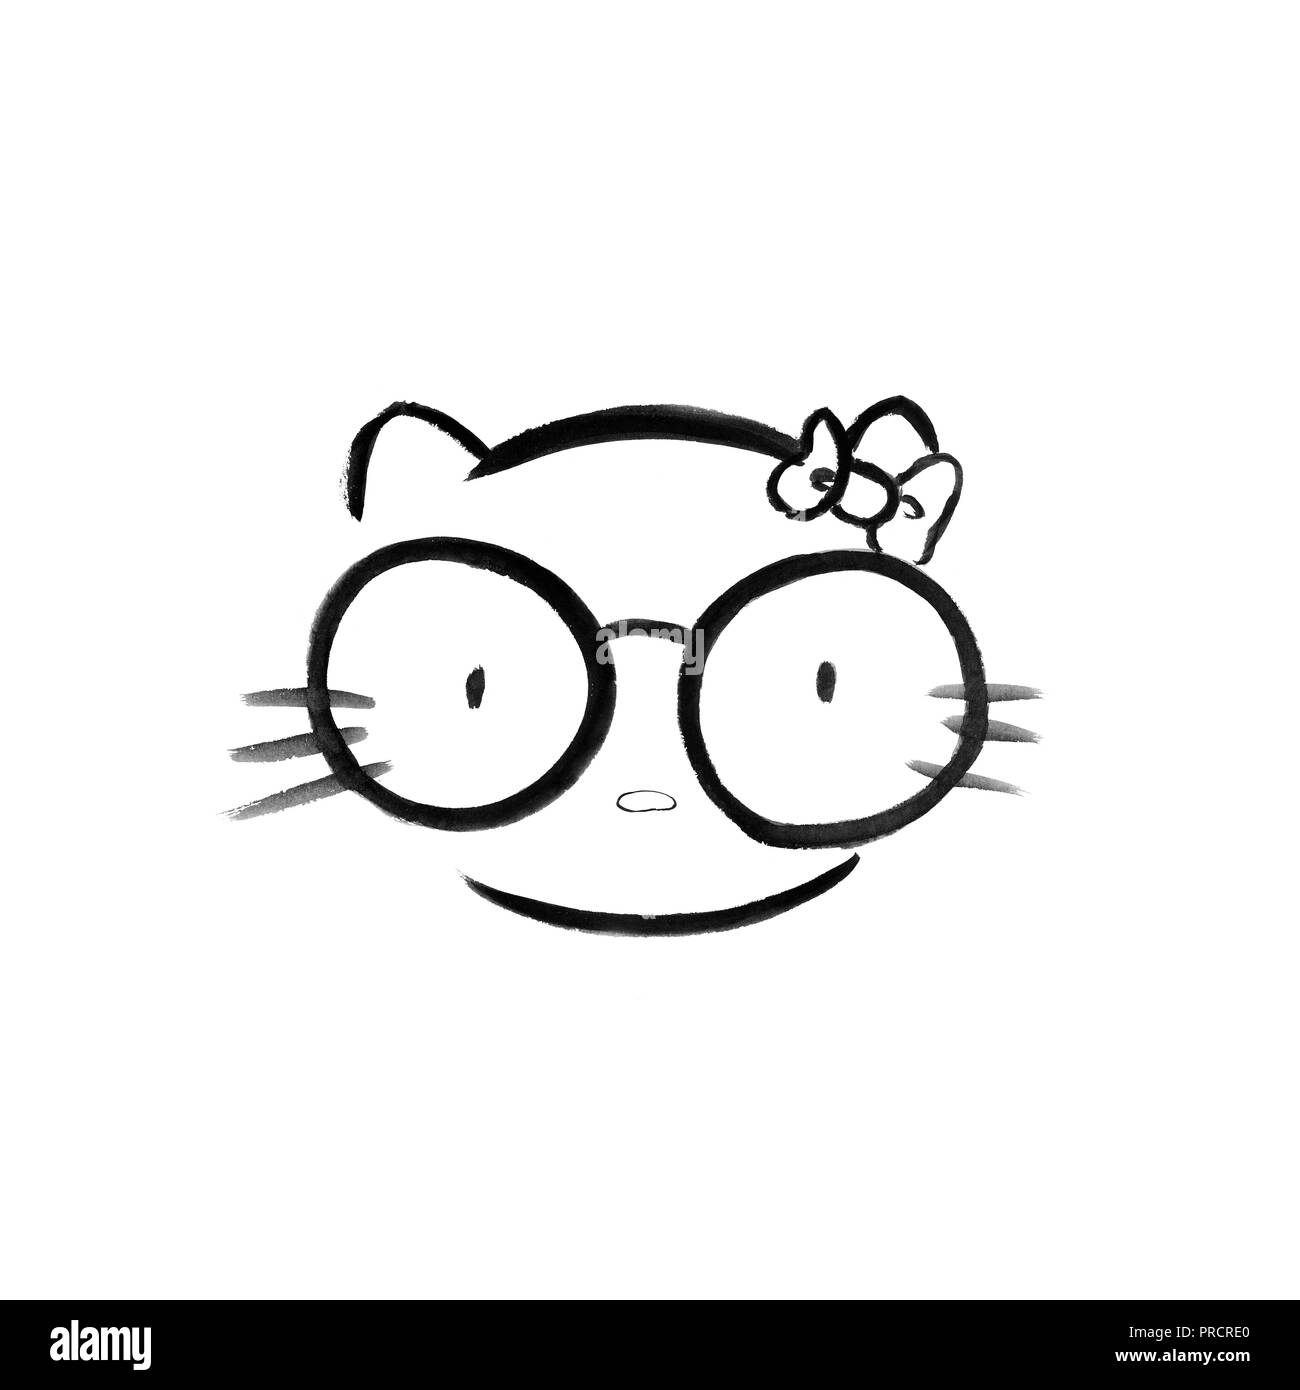 Original sumi-e painting of kawaii cute nerd hello kitty in oversized spectacles. Black ink on white rice paper traditional japanese brush painting. Stock Photo